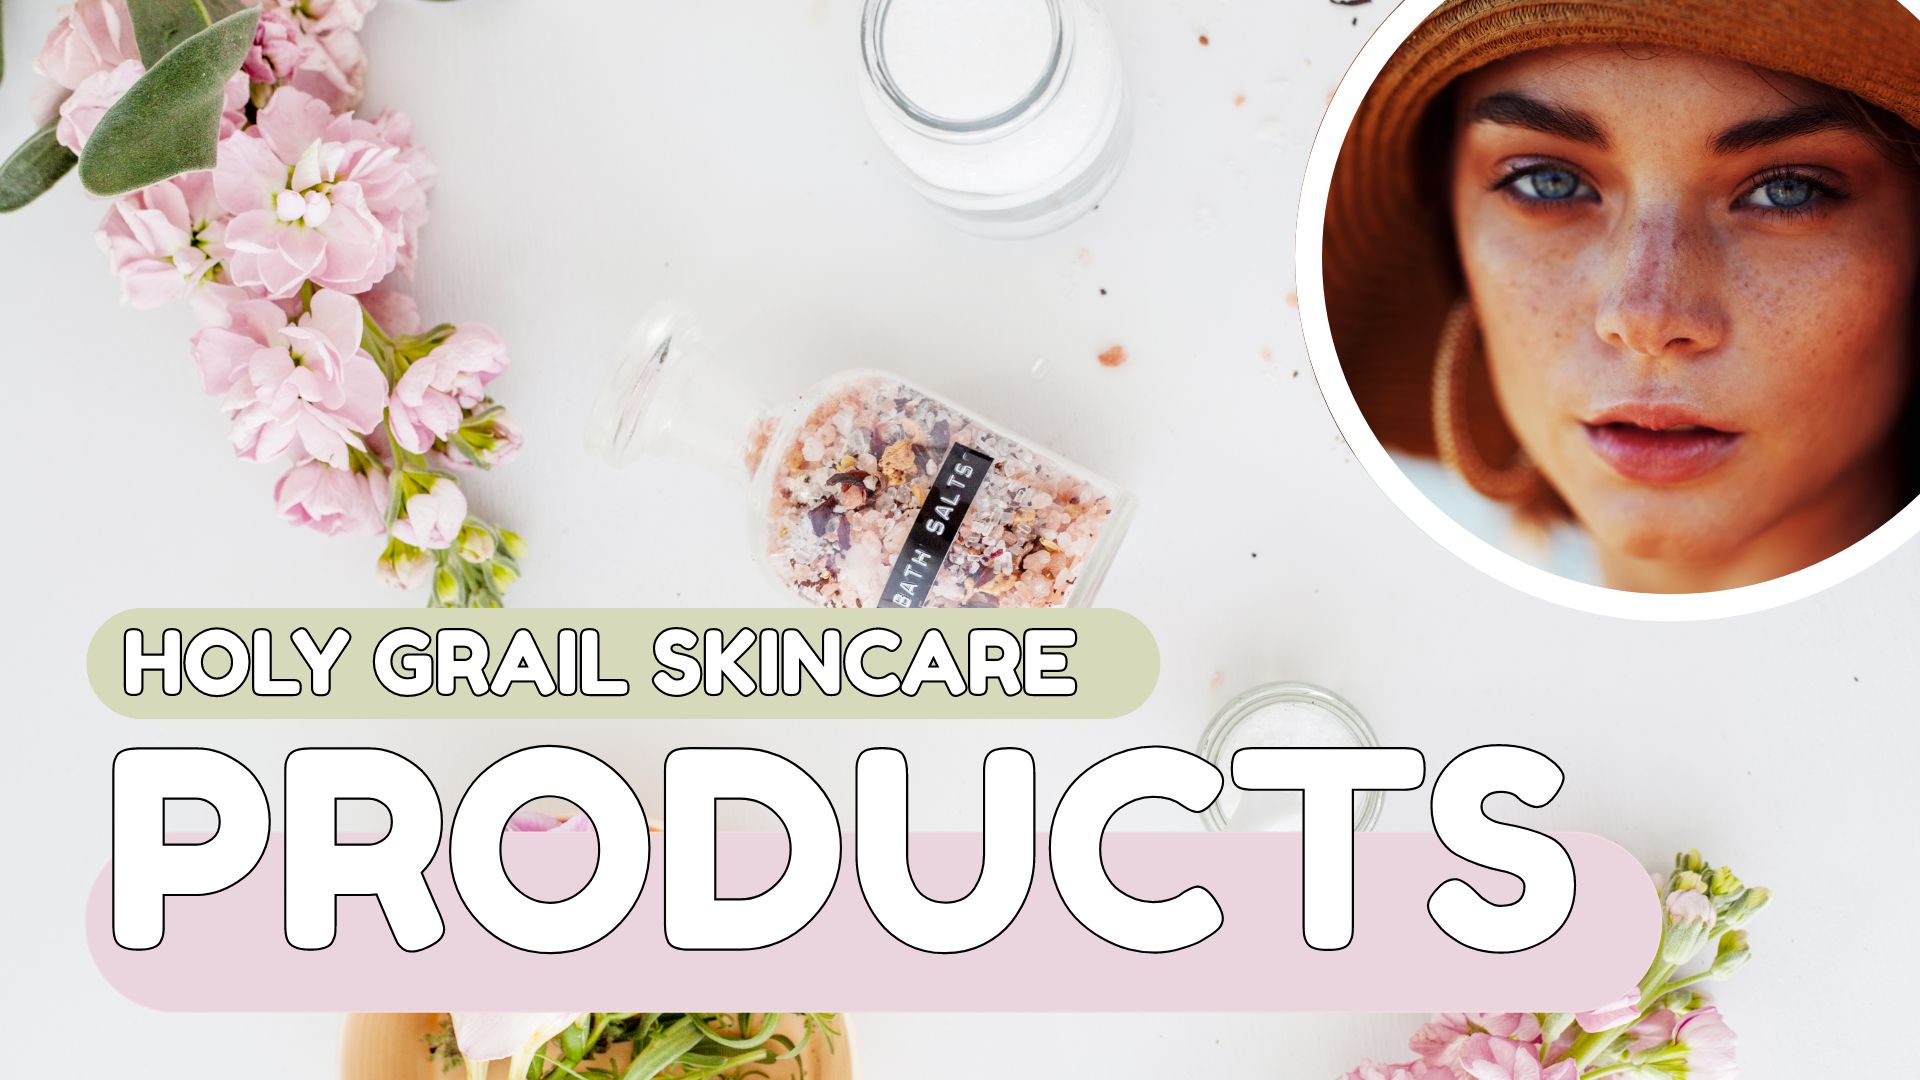 beauty product flat lay background and text that reads "holy grail skincare products"